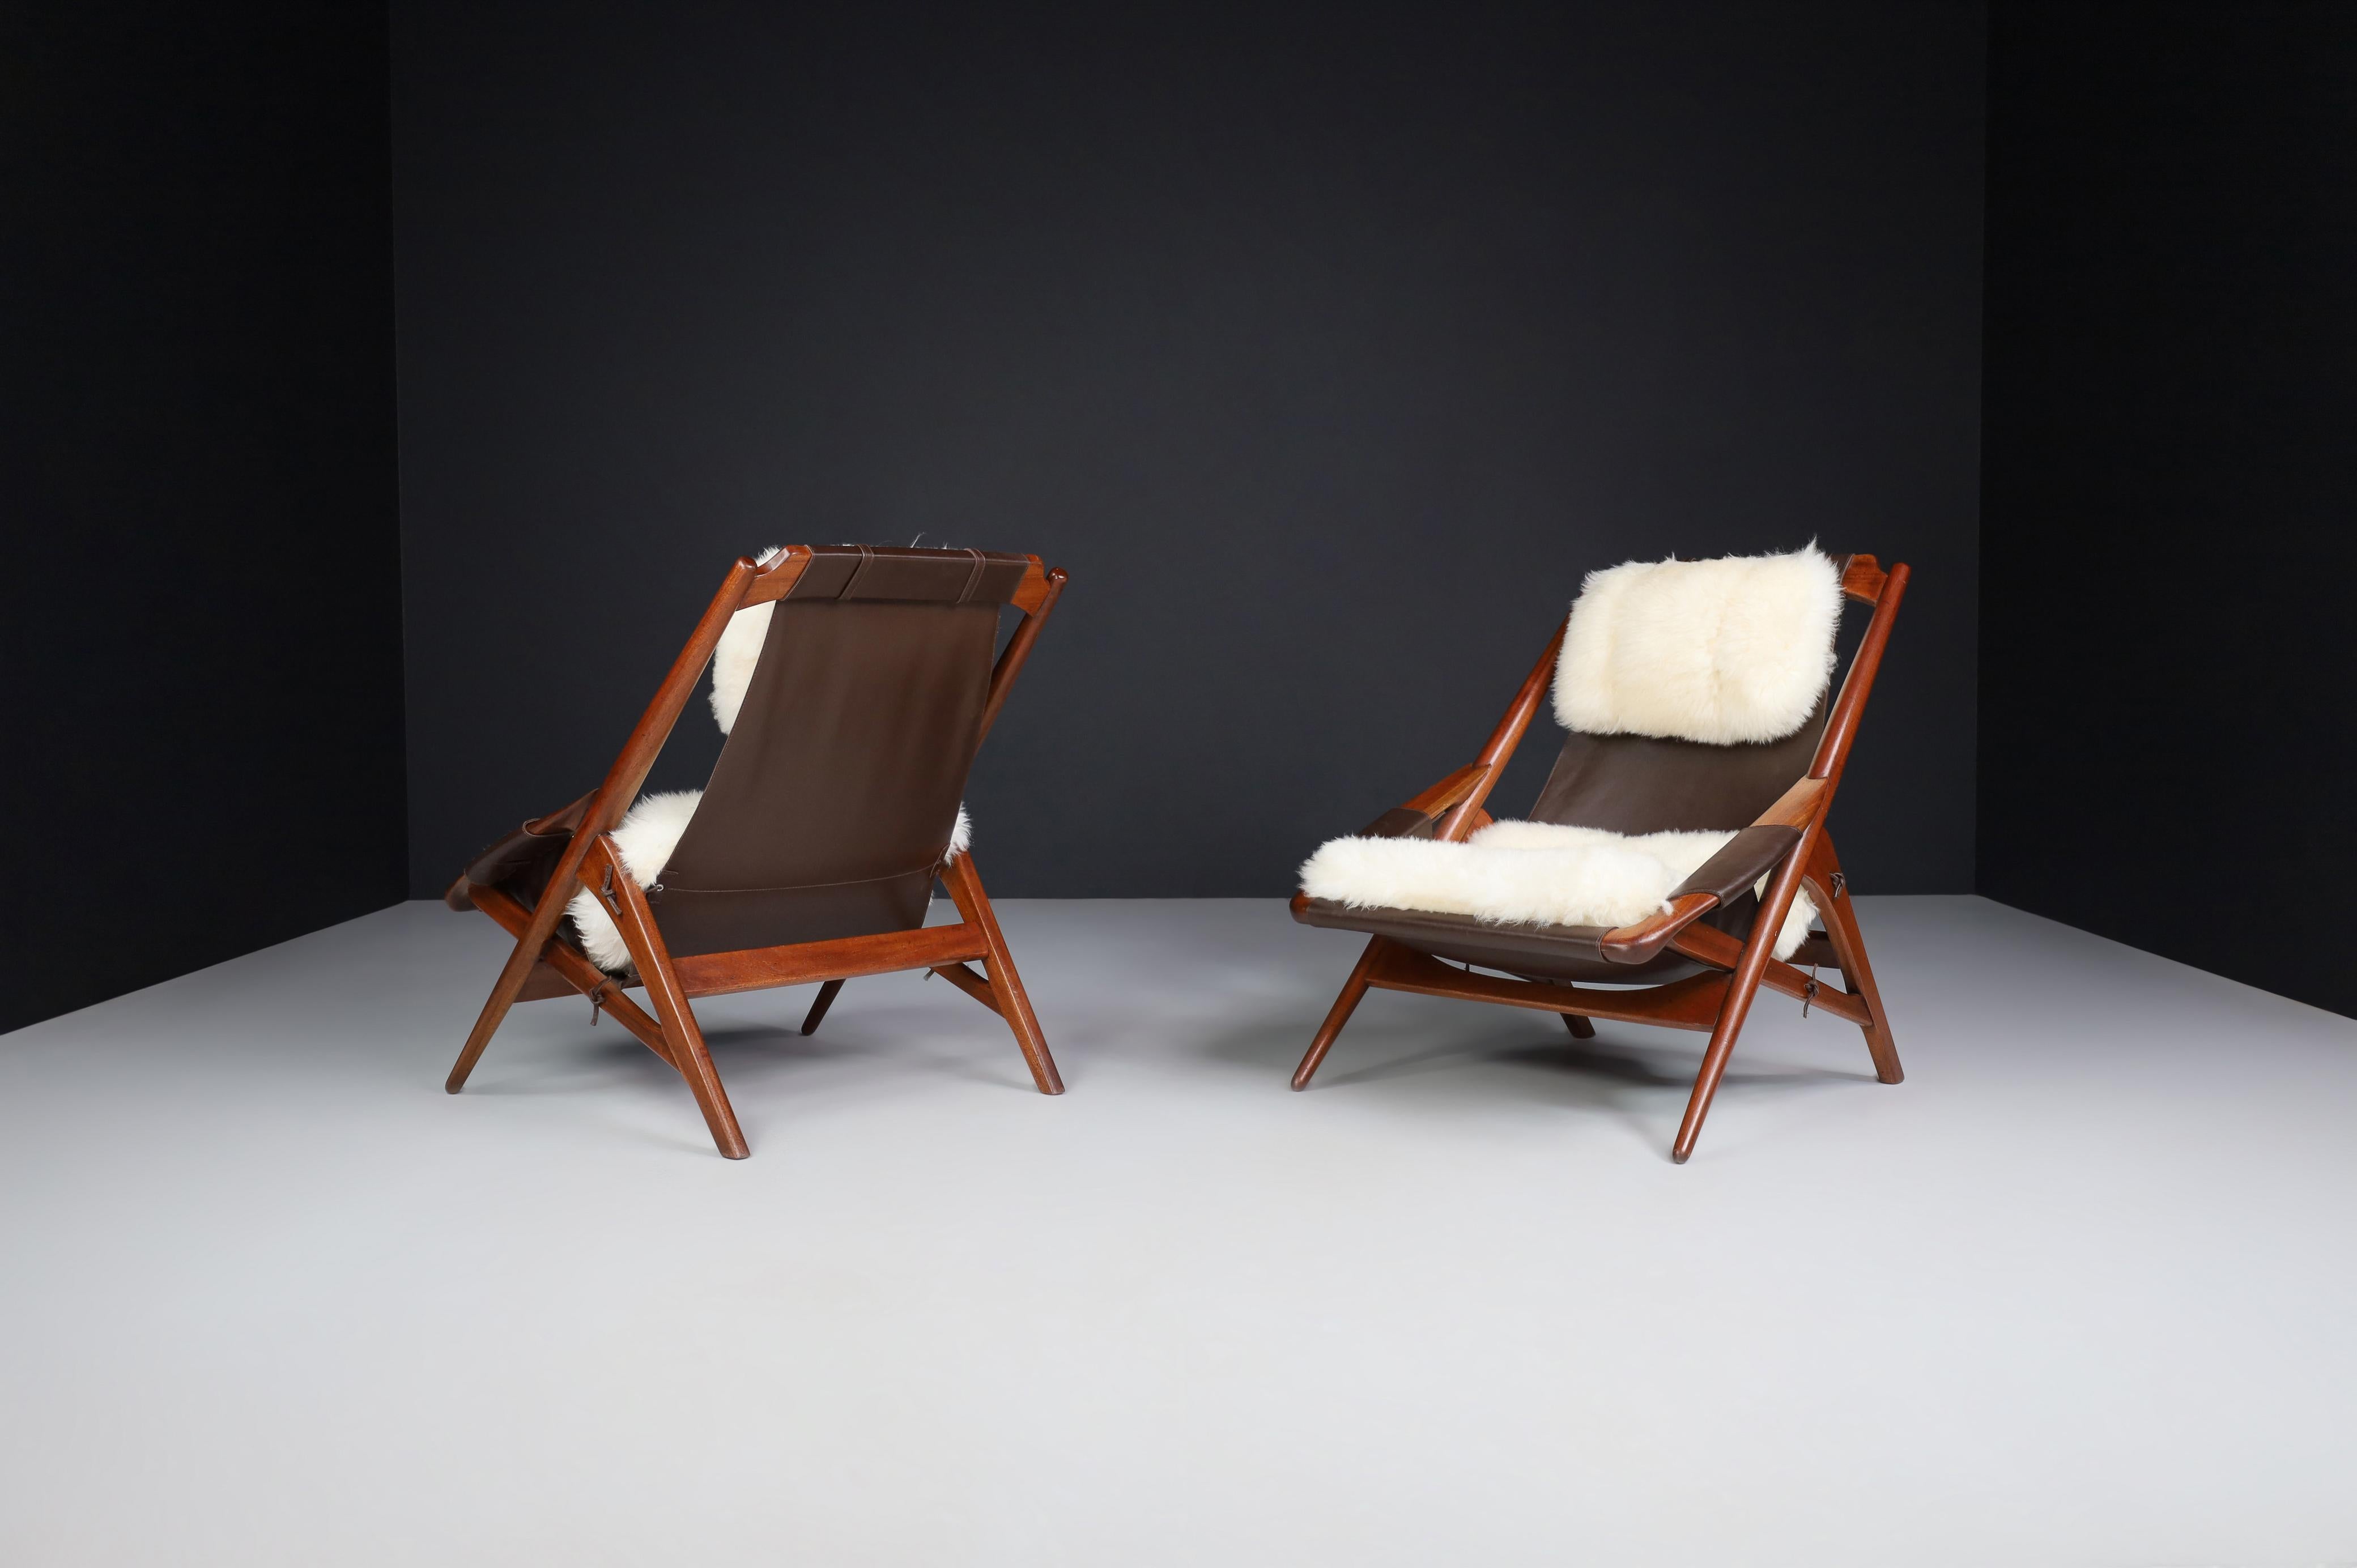 W.D. Andersag Lounge Chairs Teak and Leather, Italy, 1959 In Good Condition For Sale In Almelo, NL